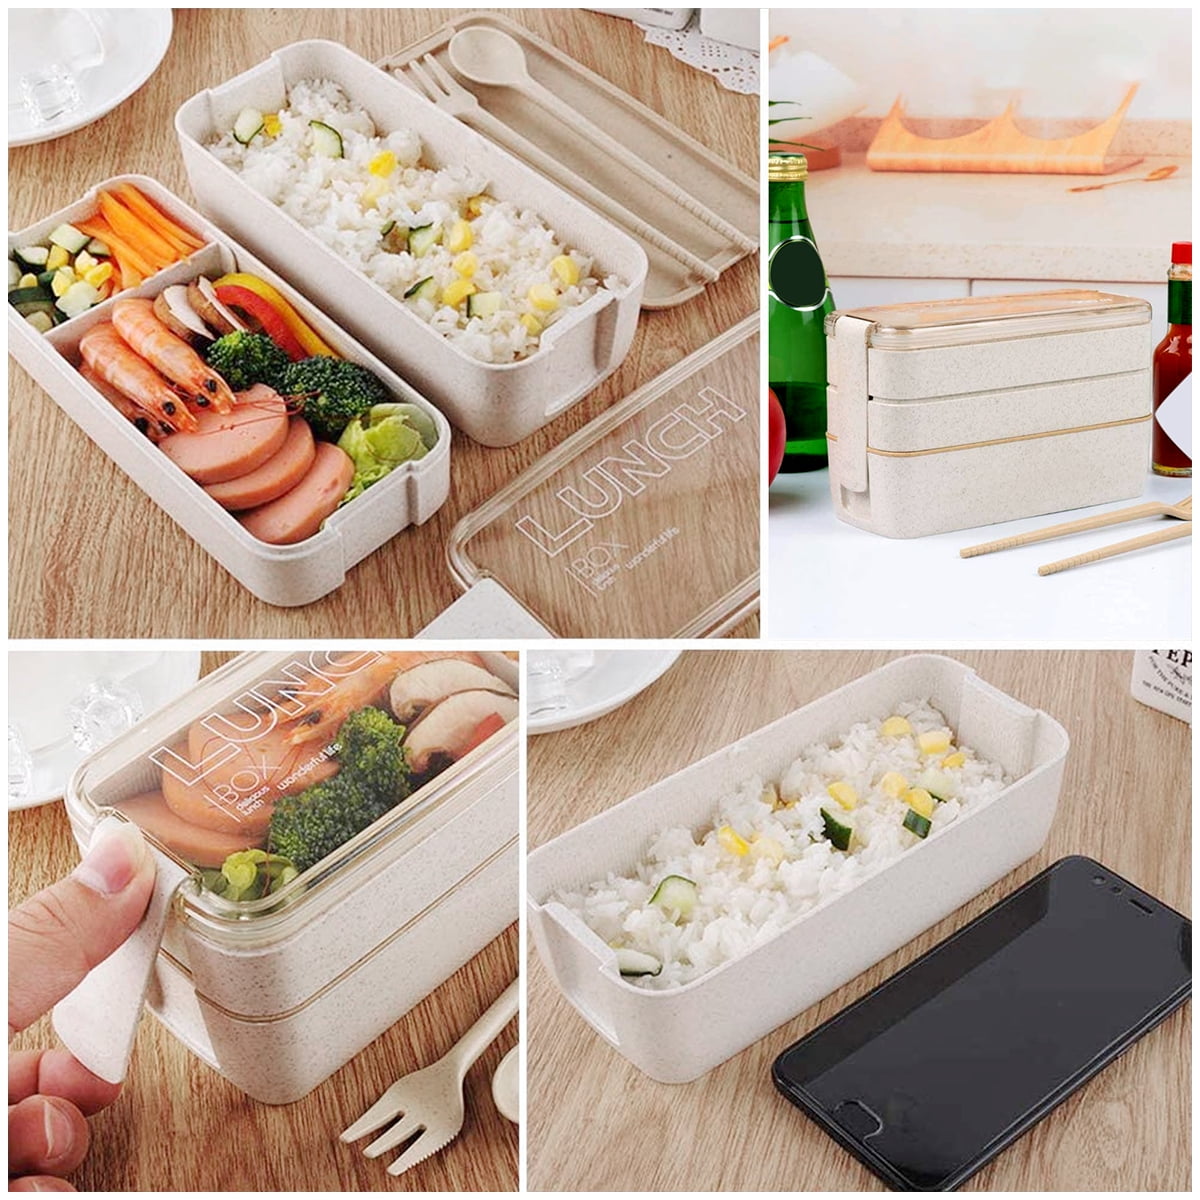 ArderLive Stackable Bento Lunch Box, Wheat Straw Portable Leakproof All-in-One Lunch Container with Lunch Bag, Eco-Friendly Food Storage Container?